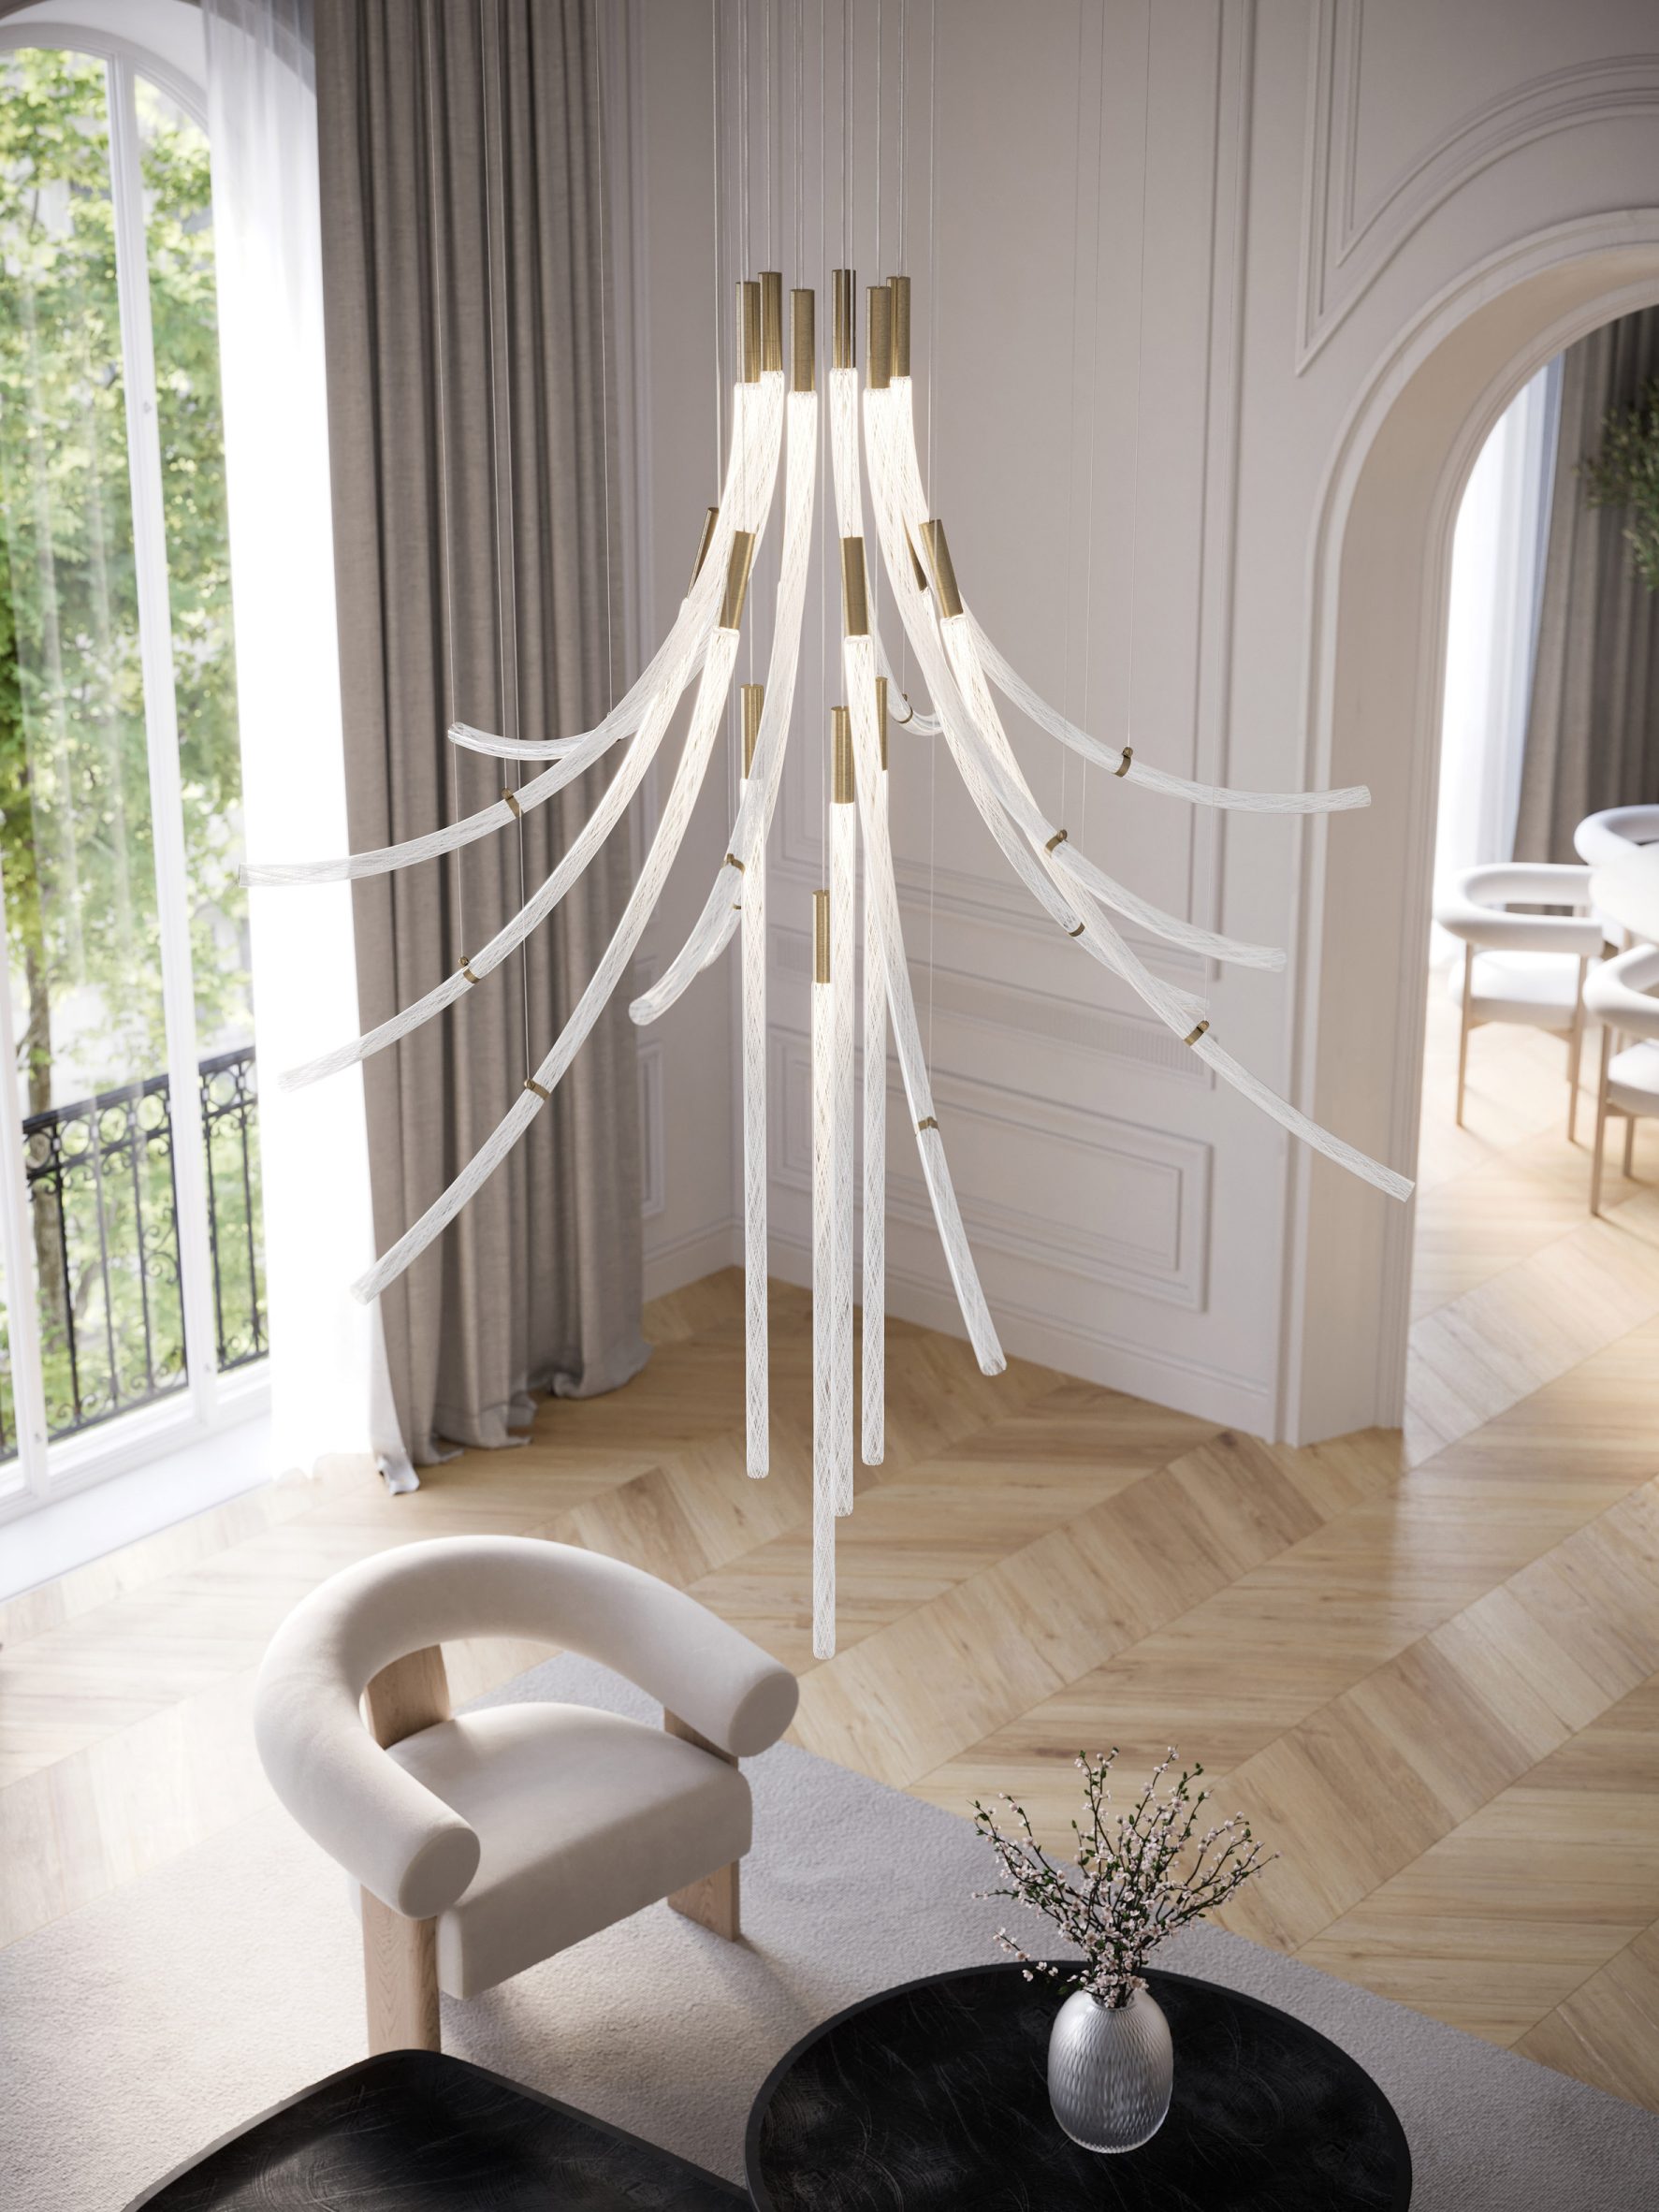 Bomma Flare pendant lighting fixture hanging over a table